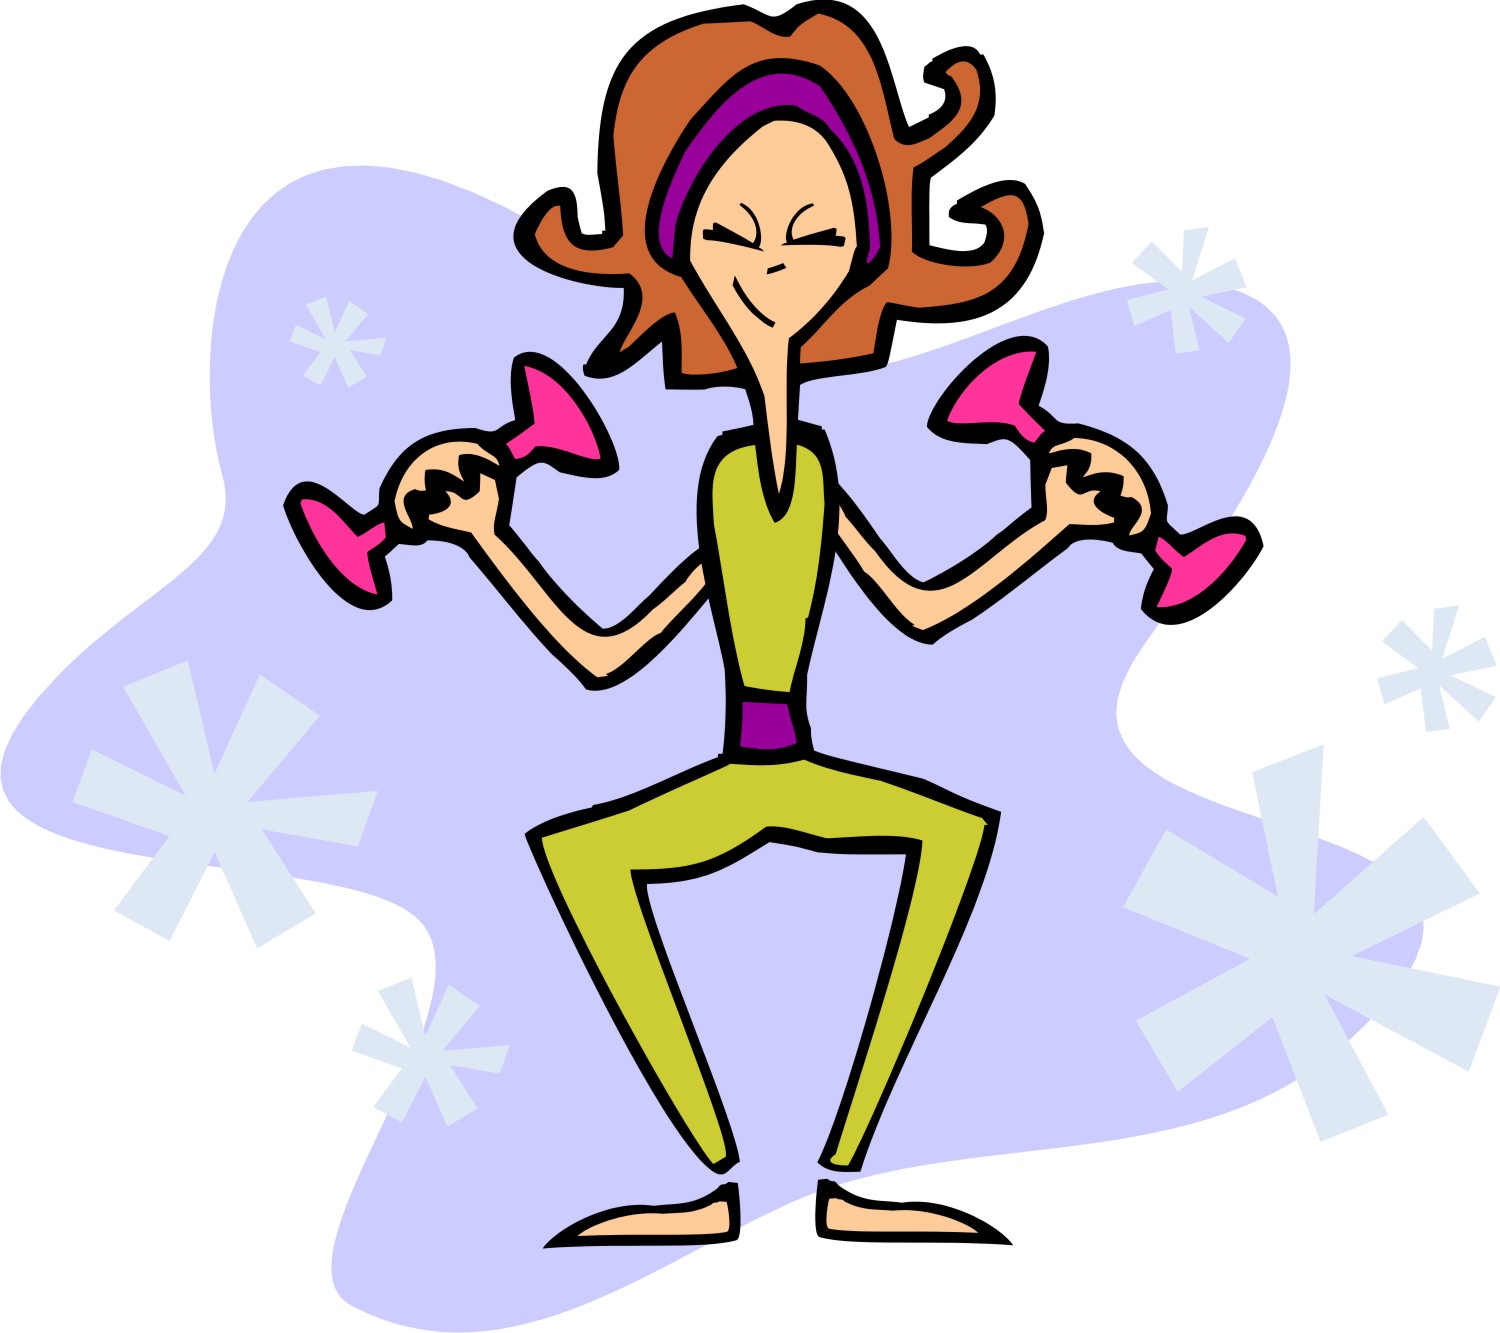 Exercise Cartoon Images | Free download on ClipArtMag